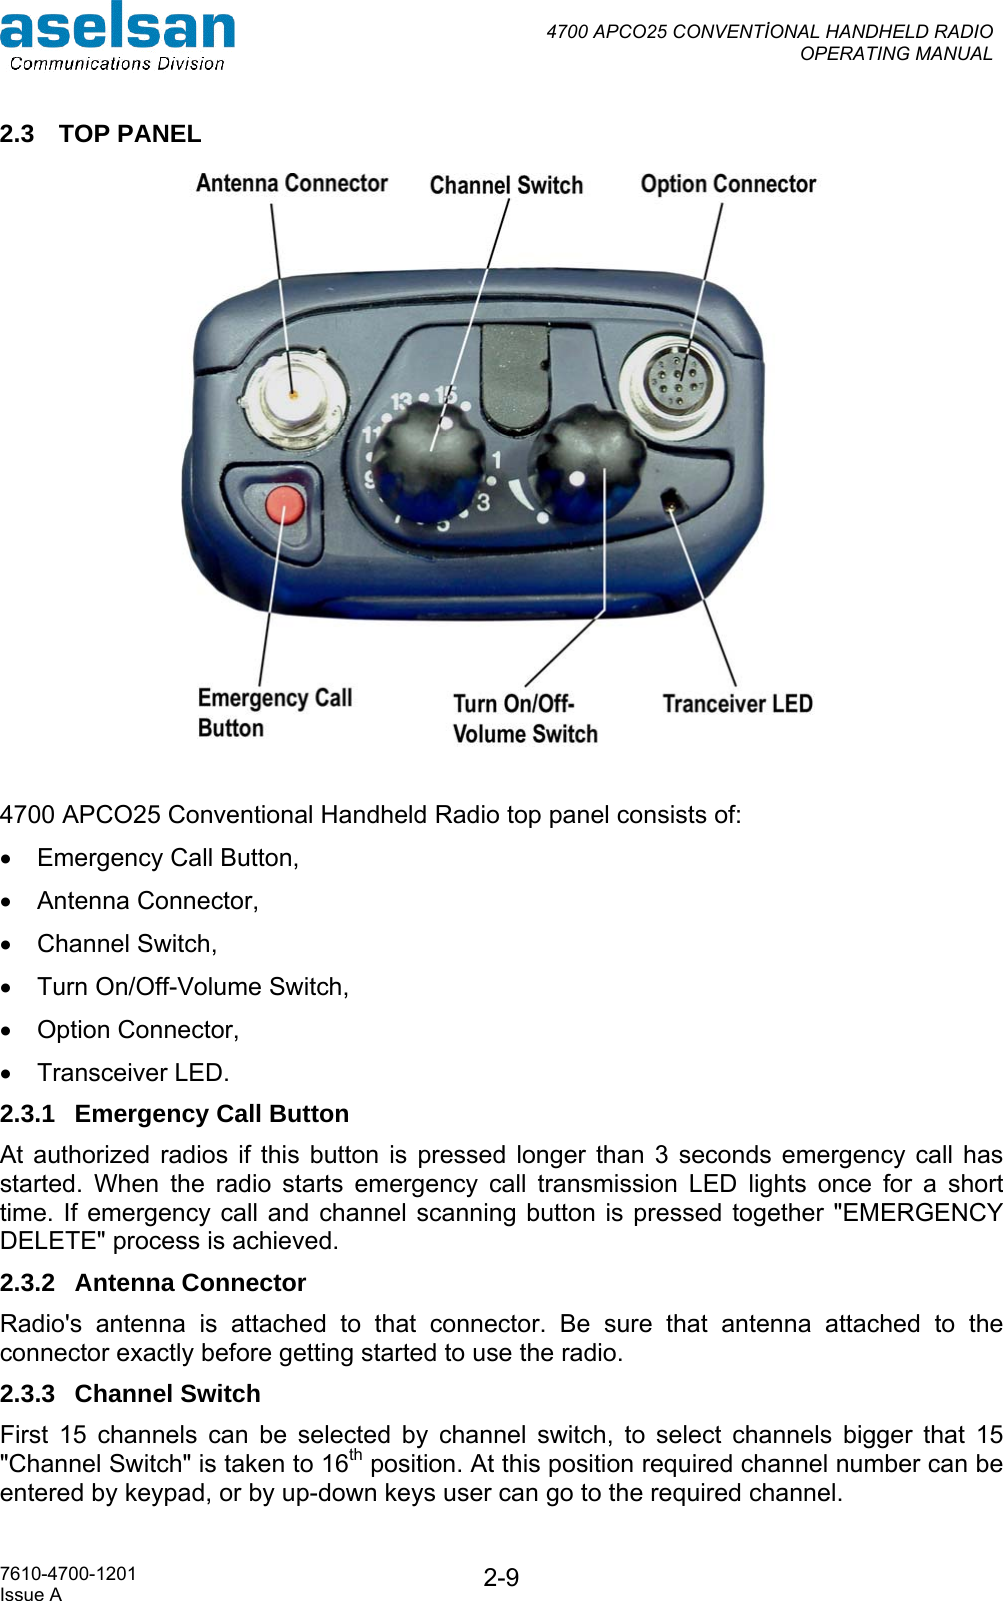  4700 APCO25 CONVENTİONAL HANDHELD RADIO  OPERATING MANUAL   7610-4700-1201 Issue A  2-92.3 TOP PANEL   4700 APCO25 Conventional Handheld Radio top panel consists of: •  Emergency Call Button,  •  Antenna Connector,  •  Channel Switch,  •  Turn On/Off-Volume Switch, •  Option Connector, •  Transceiver LED. 2.3.1  Emergency Call Button At authorized radios if this button is pressed longer than 3 seconds emergency call has started. When the radio starts emergency call transmission LED lights once for a short time. If emergency call and channel scanning button is pressed together &quot;EMERGENCY DELETE&quot; process is achieved.  2.3.2 Antenna Connector Radio&apos;s antenna is attached to that connector. Be sure that antenna attached to the connector exactly before getting started to use the radio. 2.3.3 Channel Switch First 15 channels can be selected by channel switch, to select channels bigger that 15 &quot;Channel Switch&quot; is taken to 16th position. At this position required channel number can be entered by keypad, or by up-down keys user can go to the required channel. 